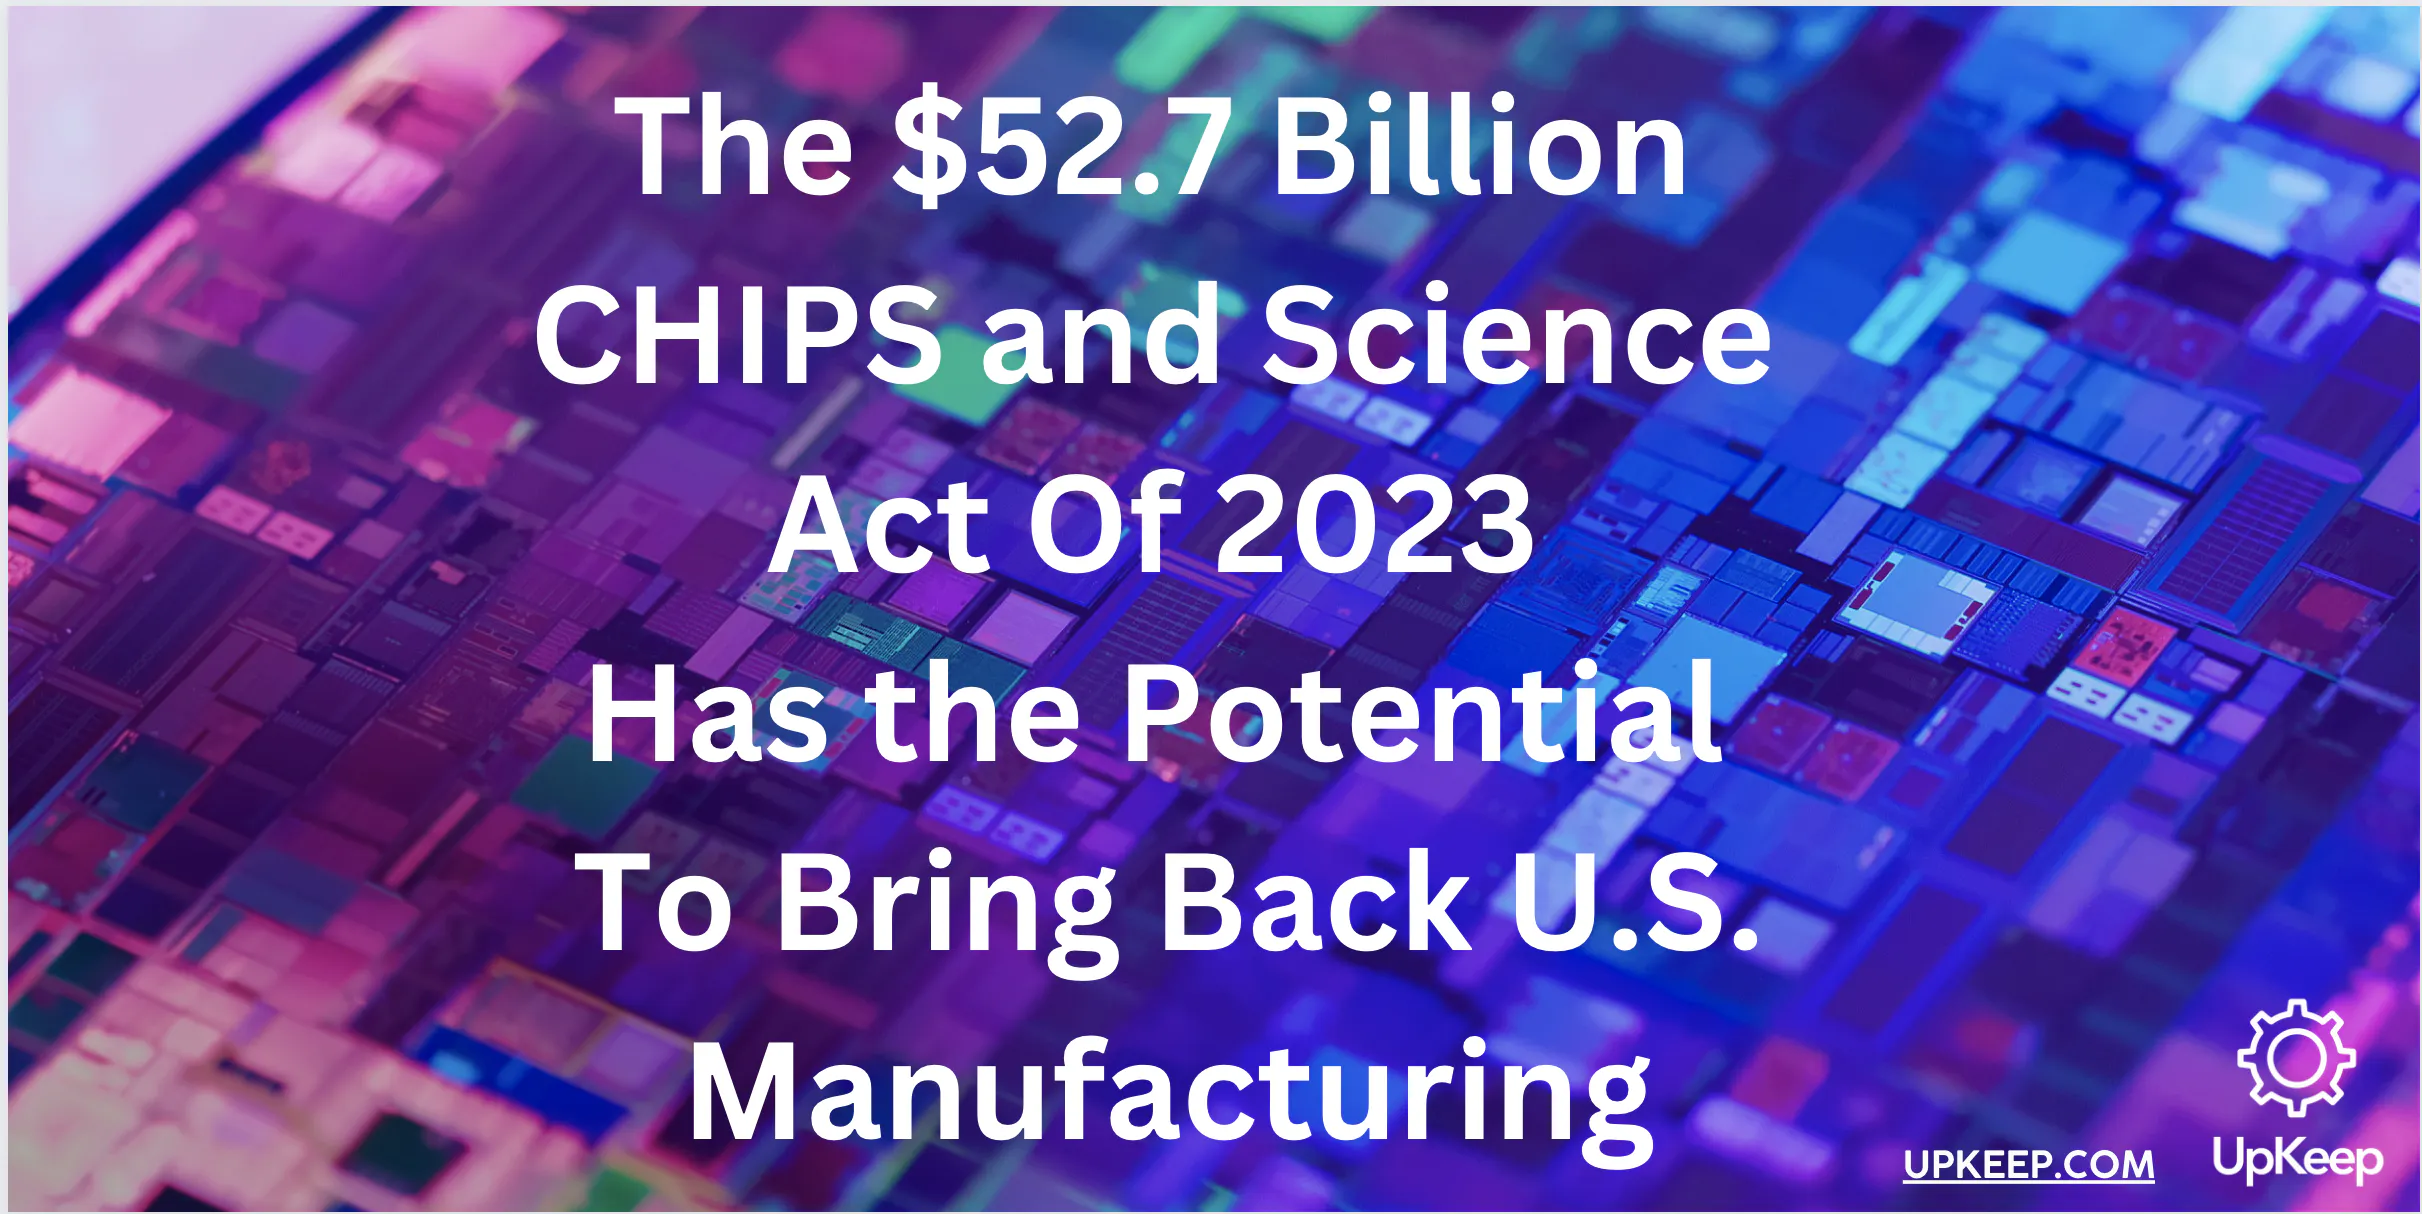 The $52.7 Billion CHIPS and Science Act Of 2023 Has the Potential To Bring Back U.S. Manufacturing